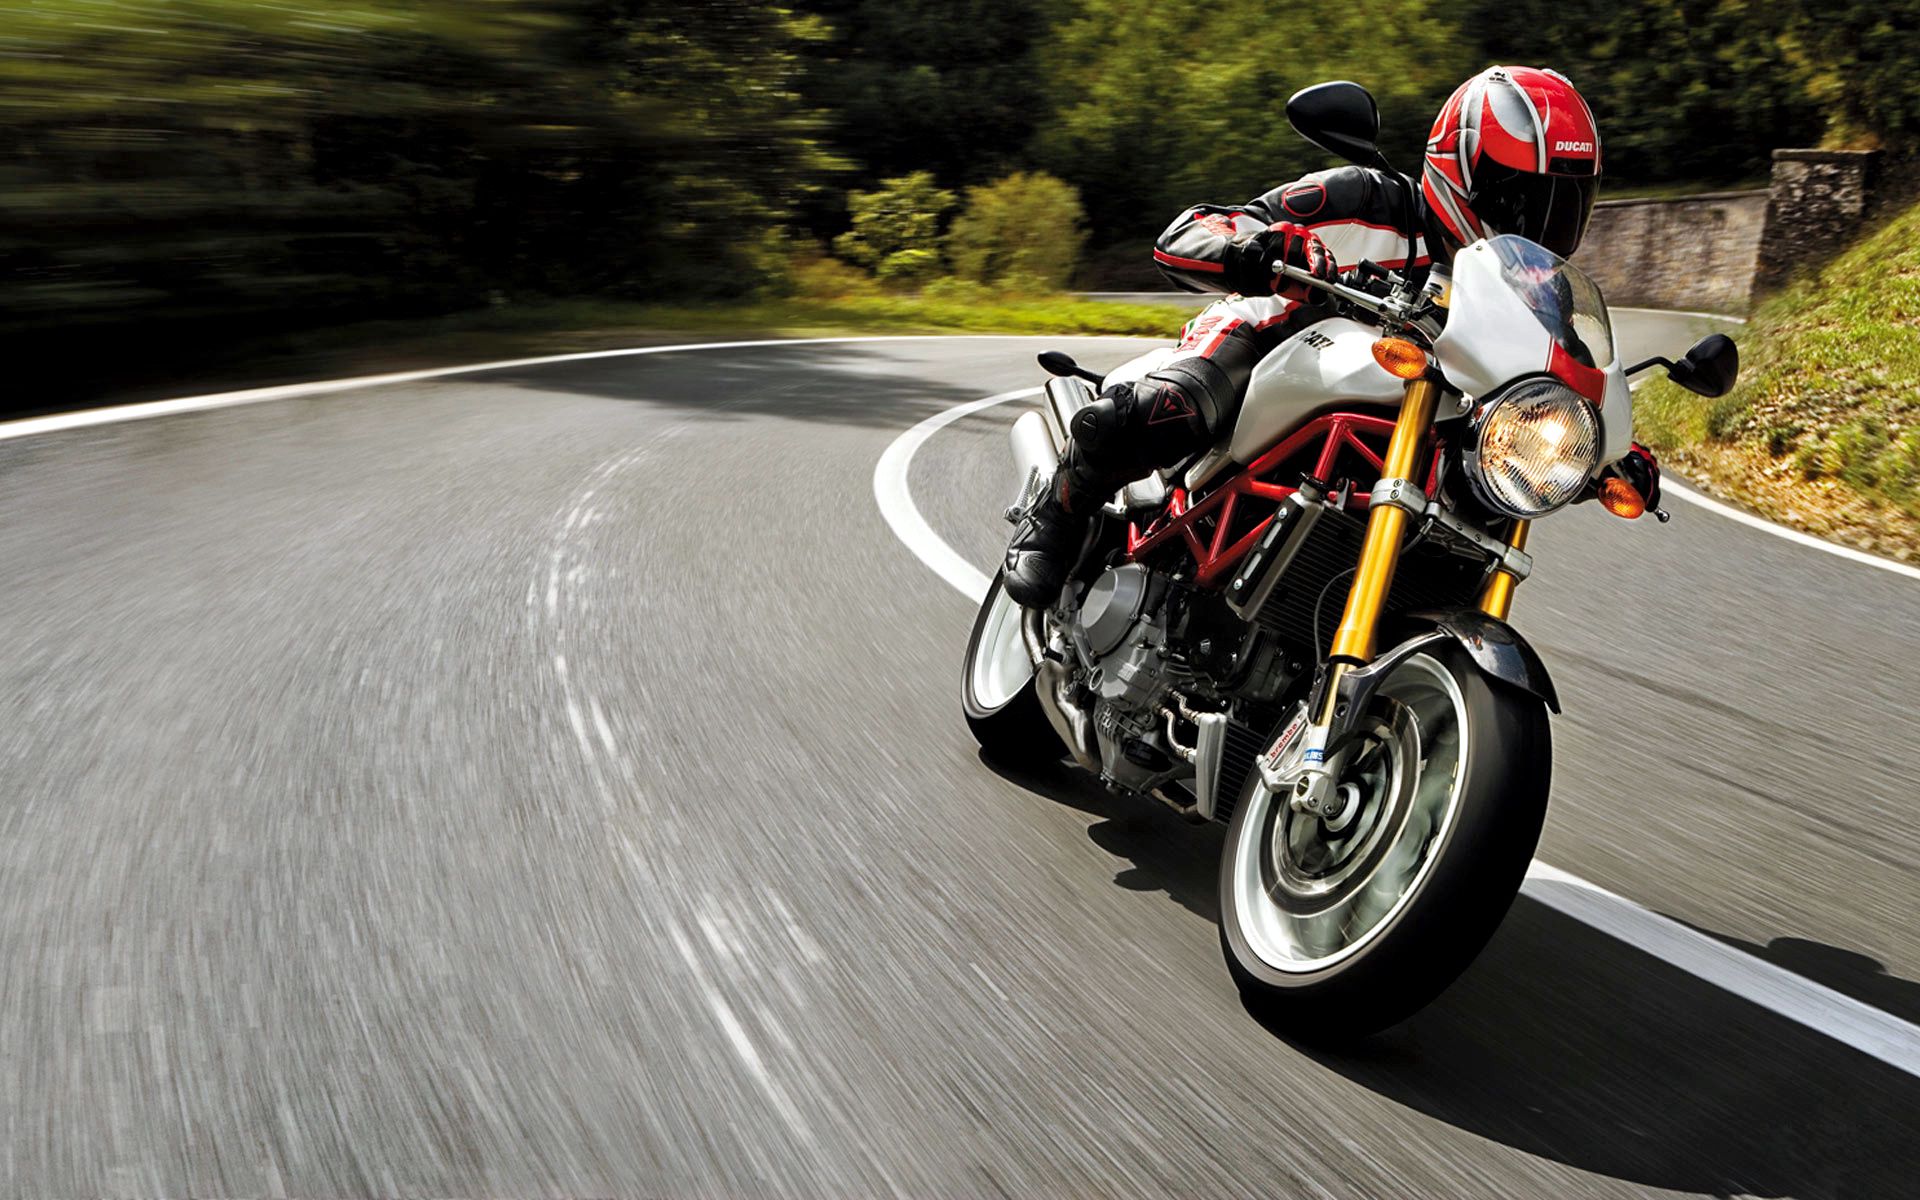 speed, motorcyclist, motorcycles, ducati, monster, s4r